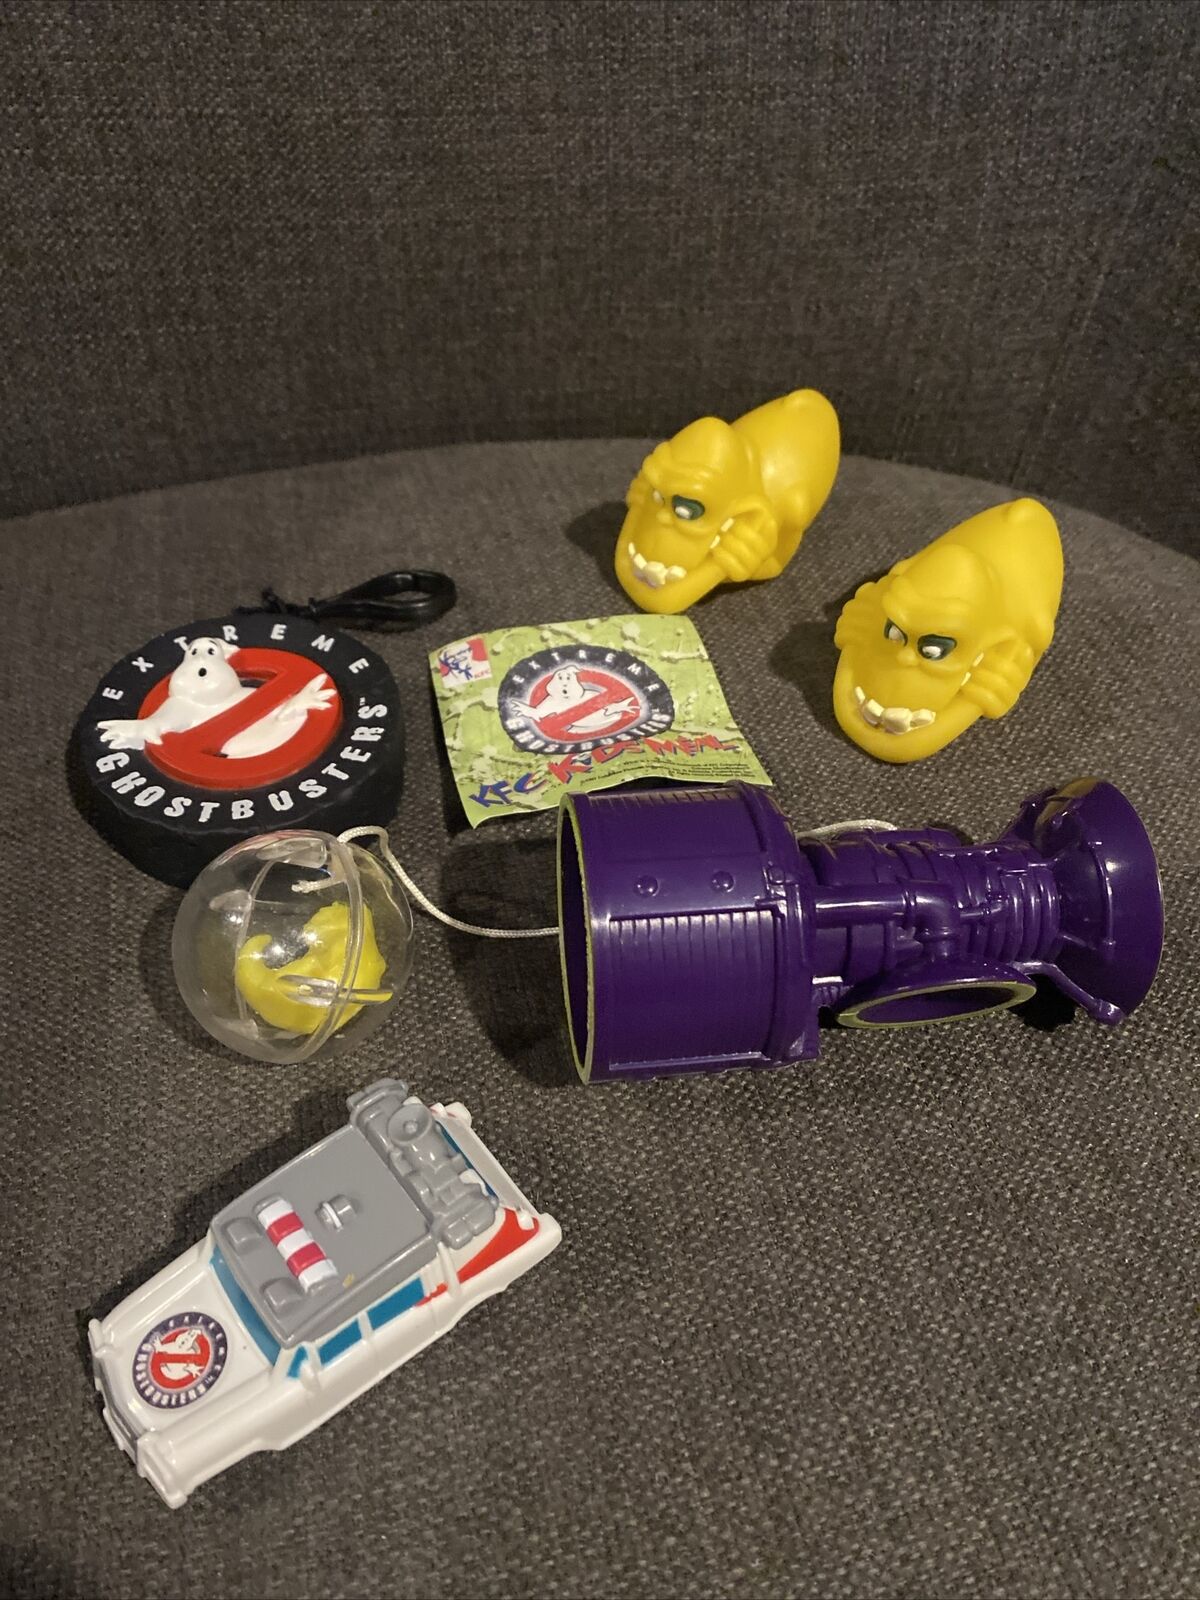 1997 Ghostbuster's Toy Lot Of 5  Hockey Puck Clip on Change Bank, Car, Squeeze